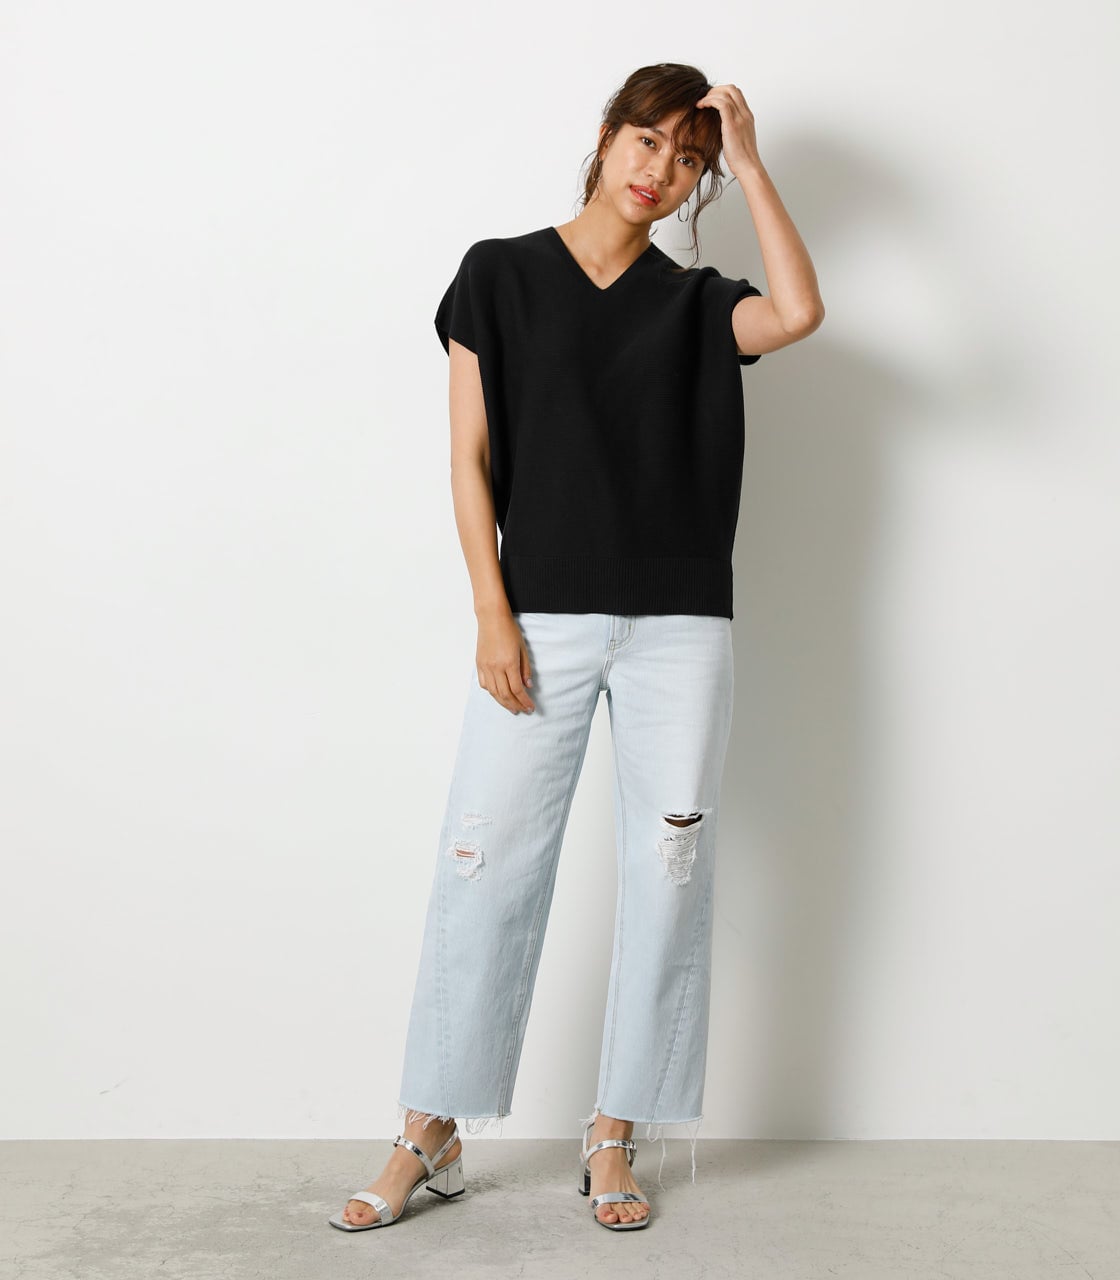 LOOSE PANEL KNIT TOP/ルーズパネルニットトップ 詳細画像 BLK 3